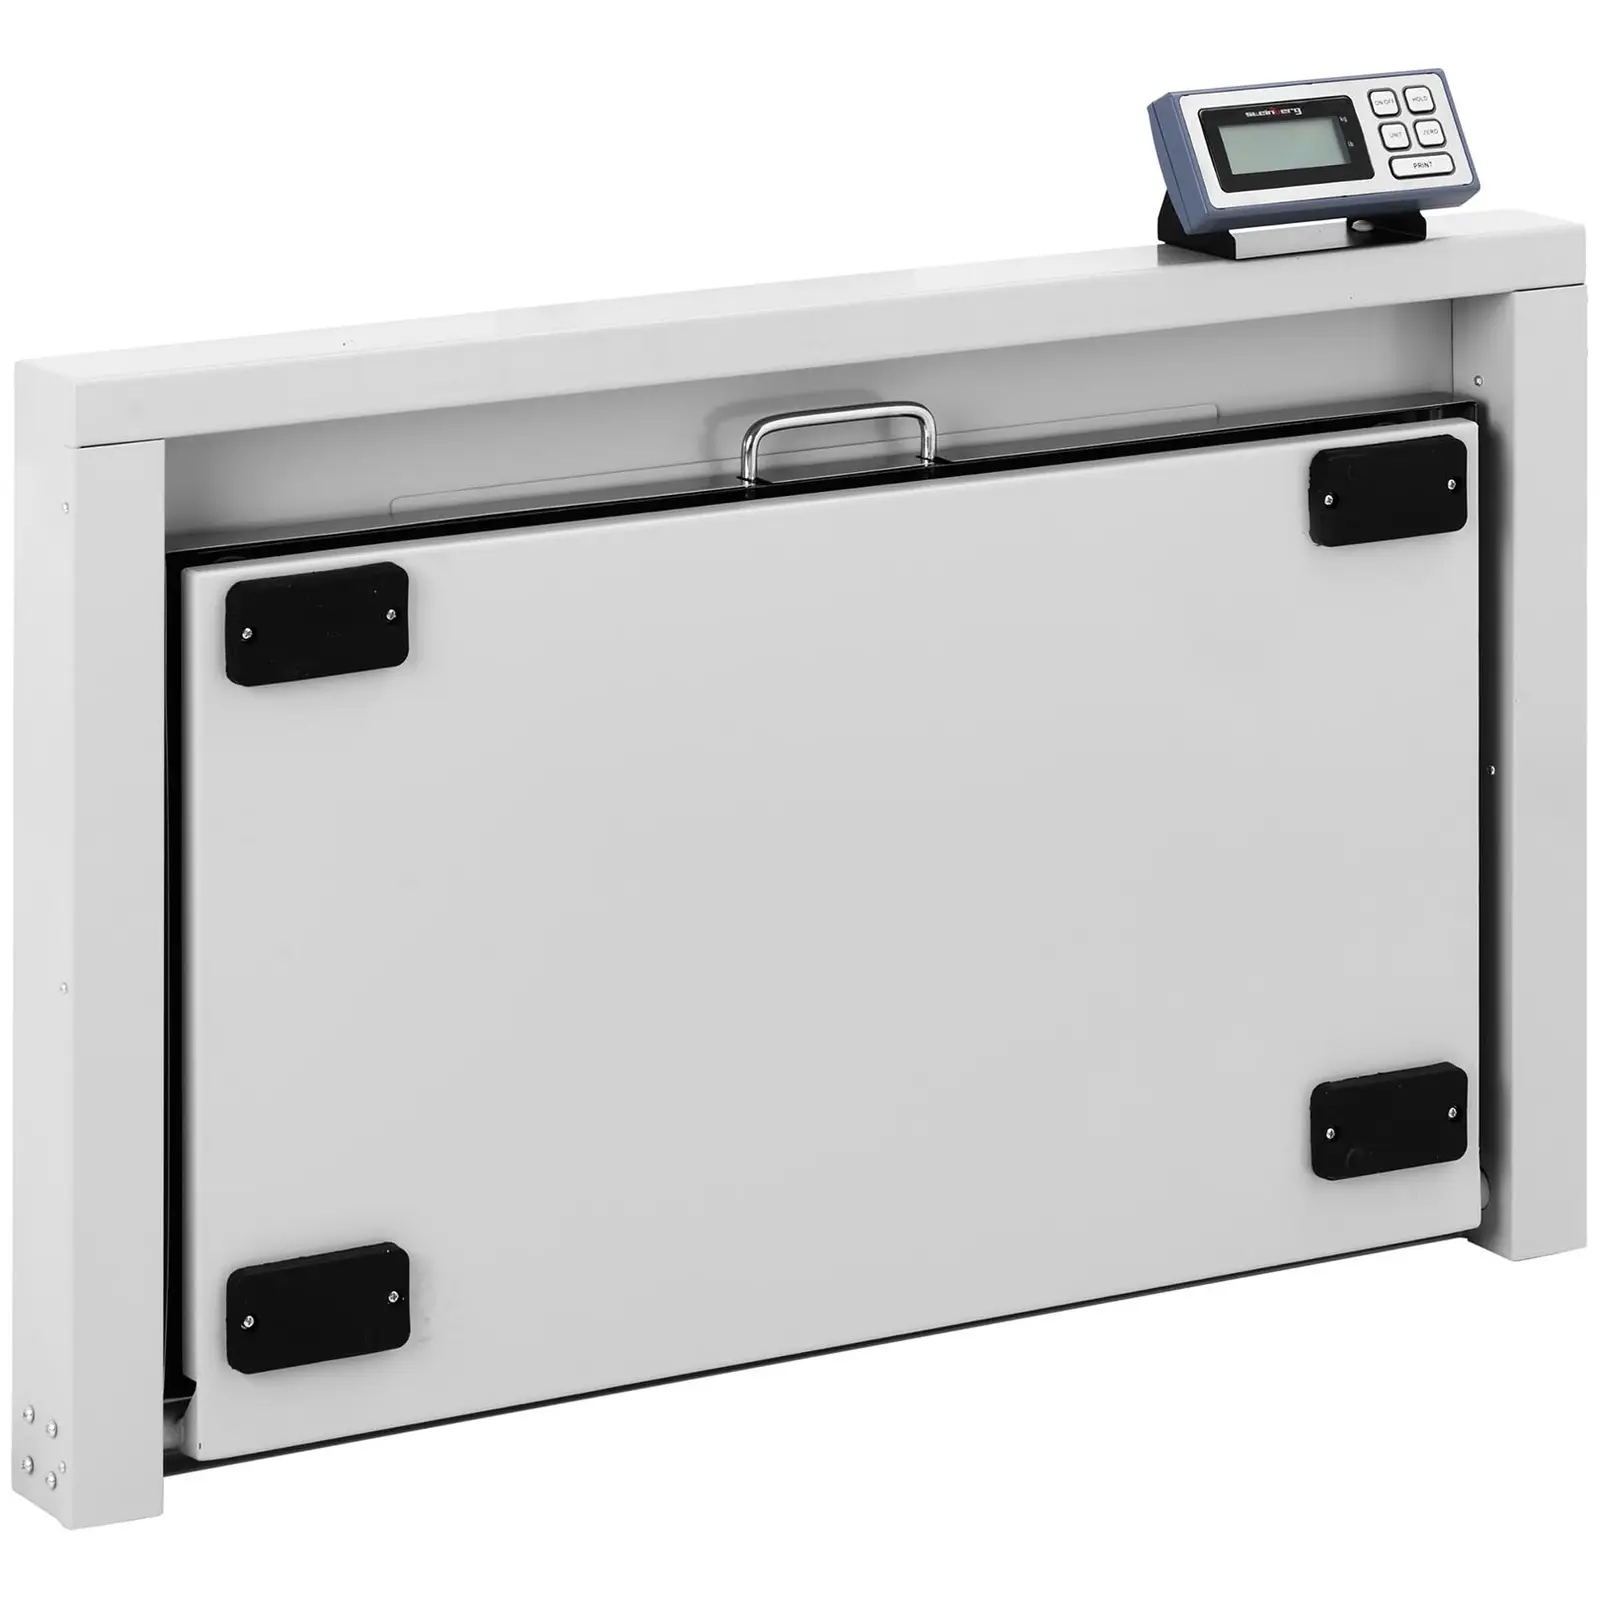 Industrial Scale - 150 kg / 50 g - animal-friendly with anti-slip mat - foldable - LCD